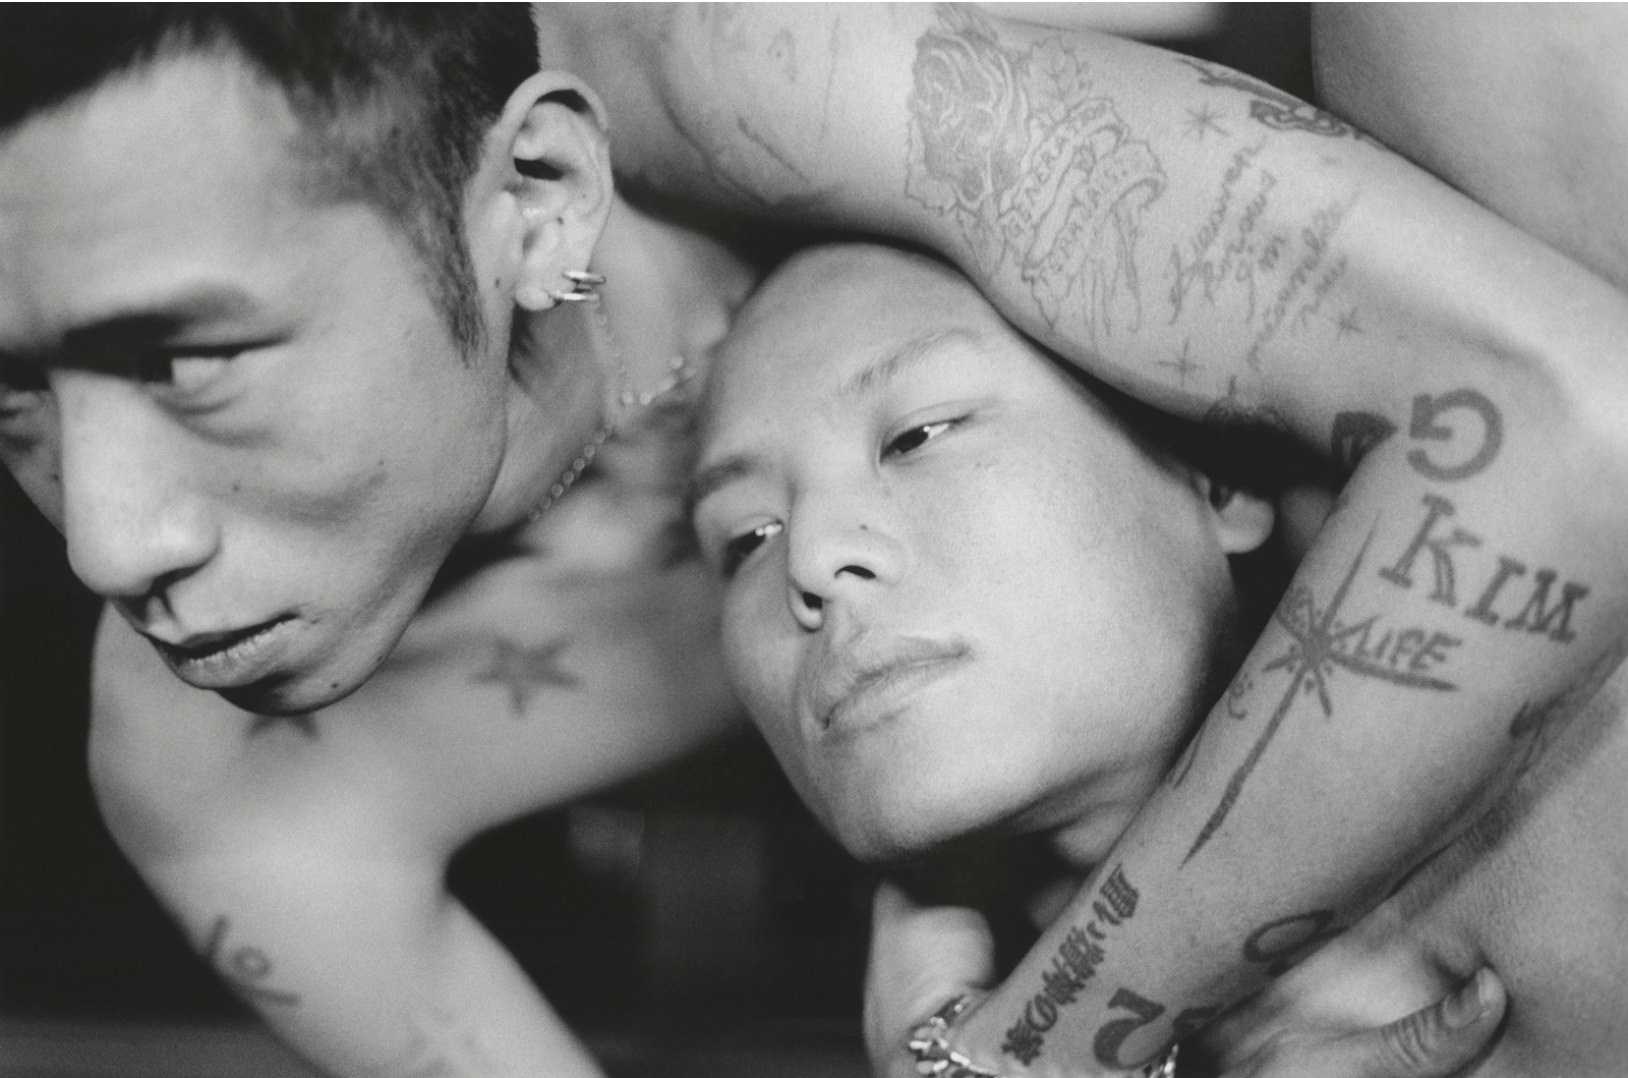 Untitled, from the series 'Boys of Hong Kong', 2018 c Alexandra Leese/ courtesy of the artist